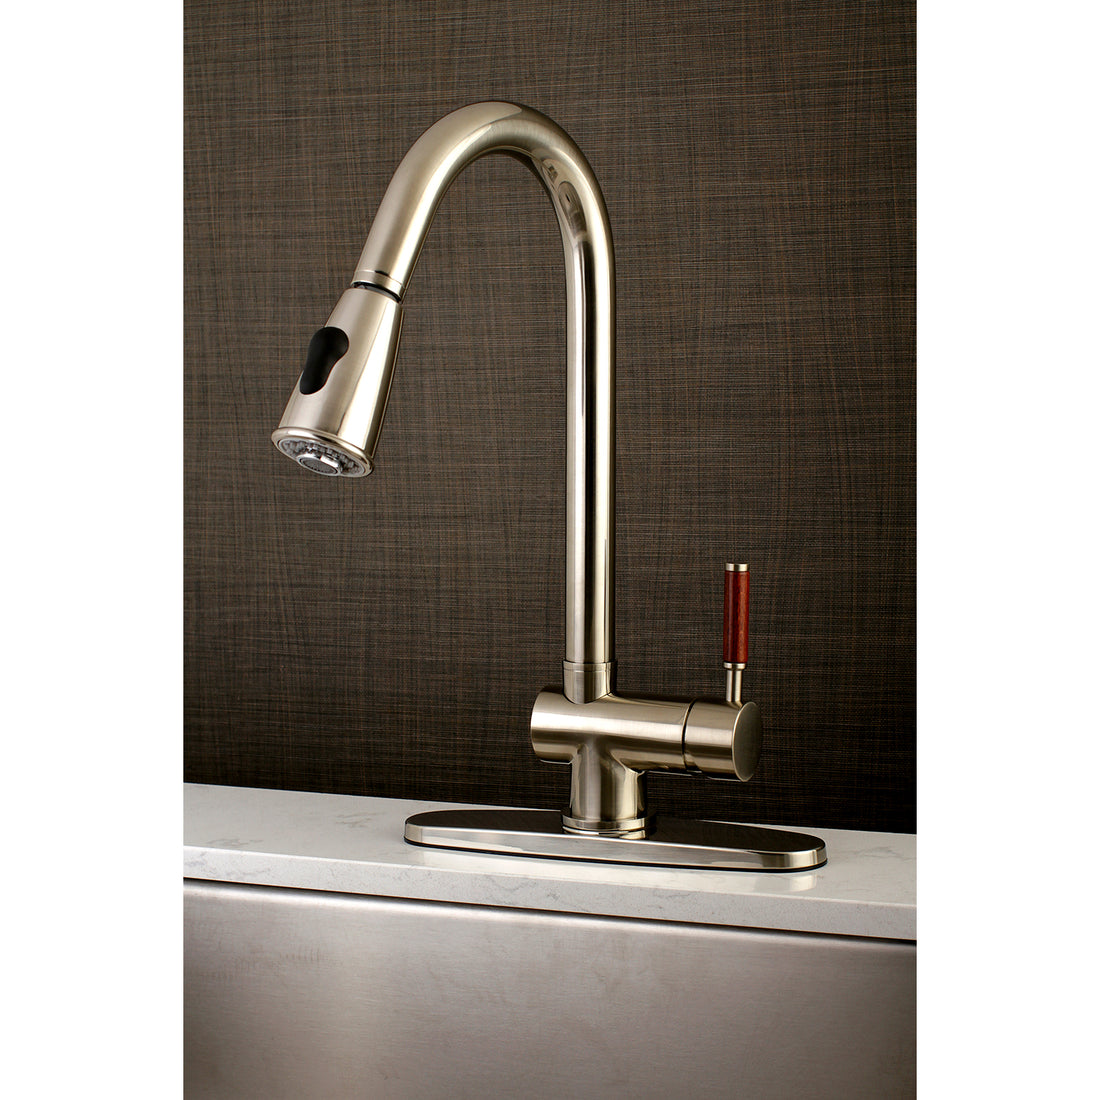 Tap into nature’s exclusive elegance and beauty with our collection of wood handle faucets